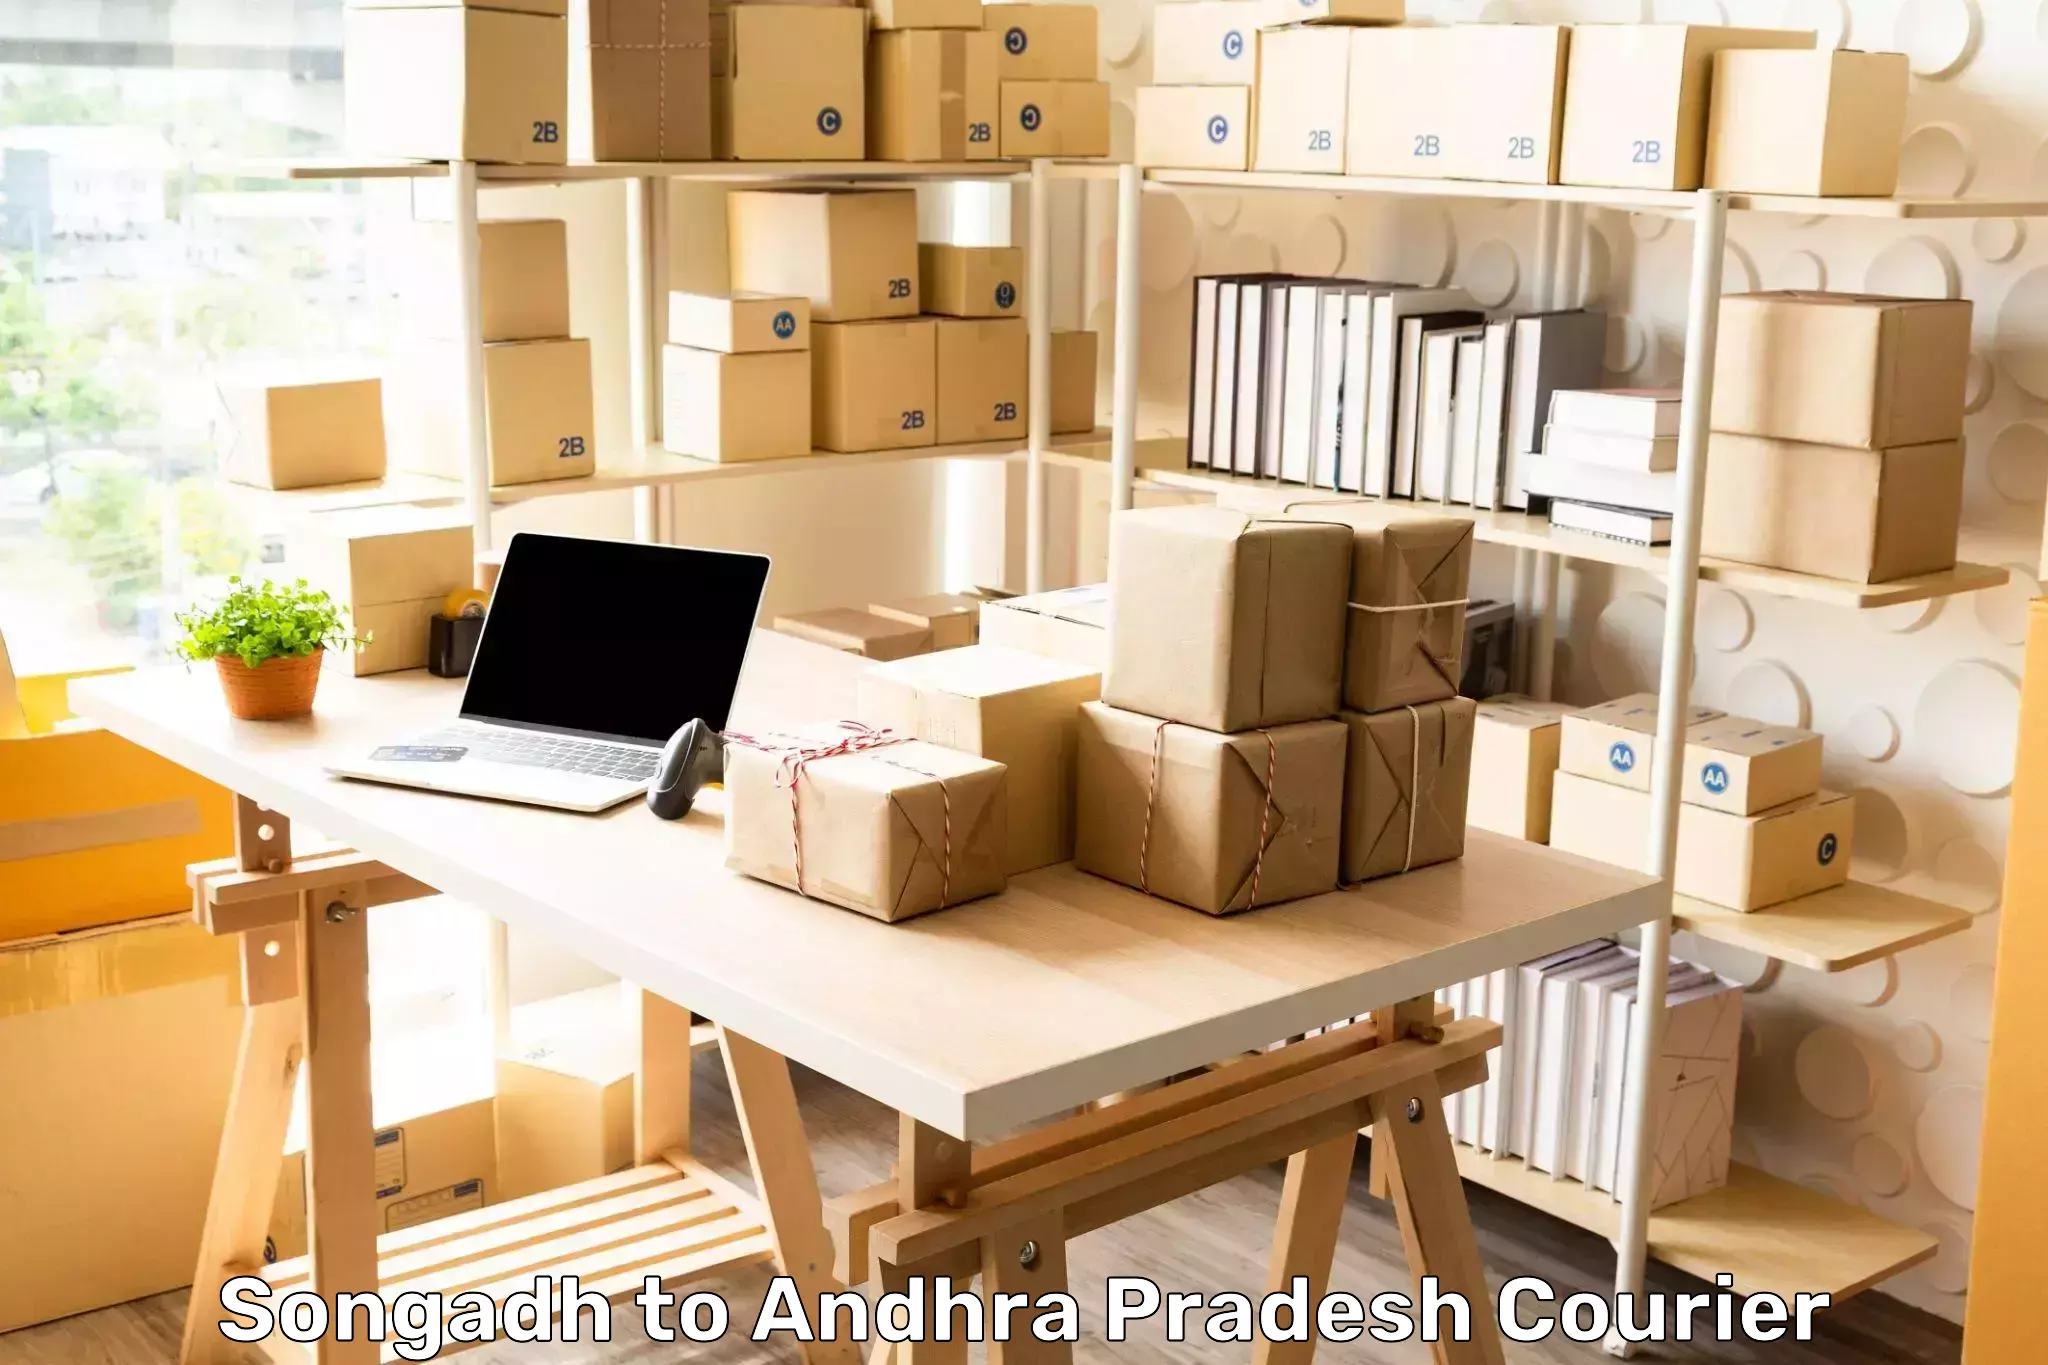 Customer-oriented courier services Songadh to Narsipatnam